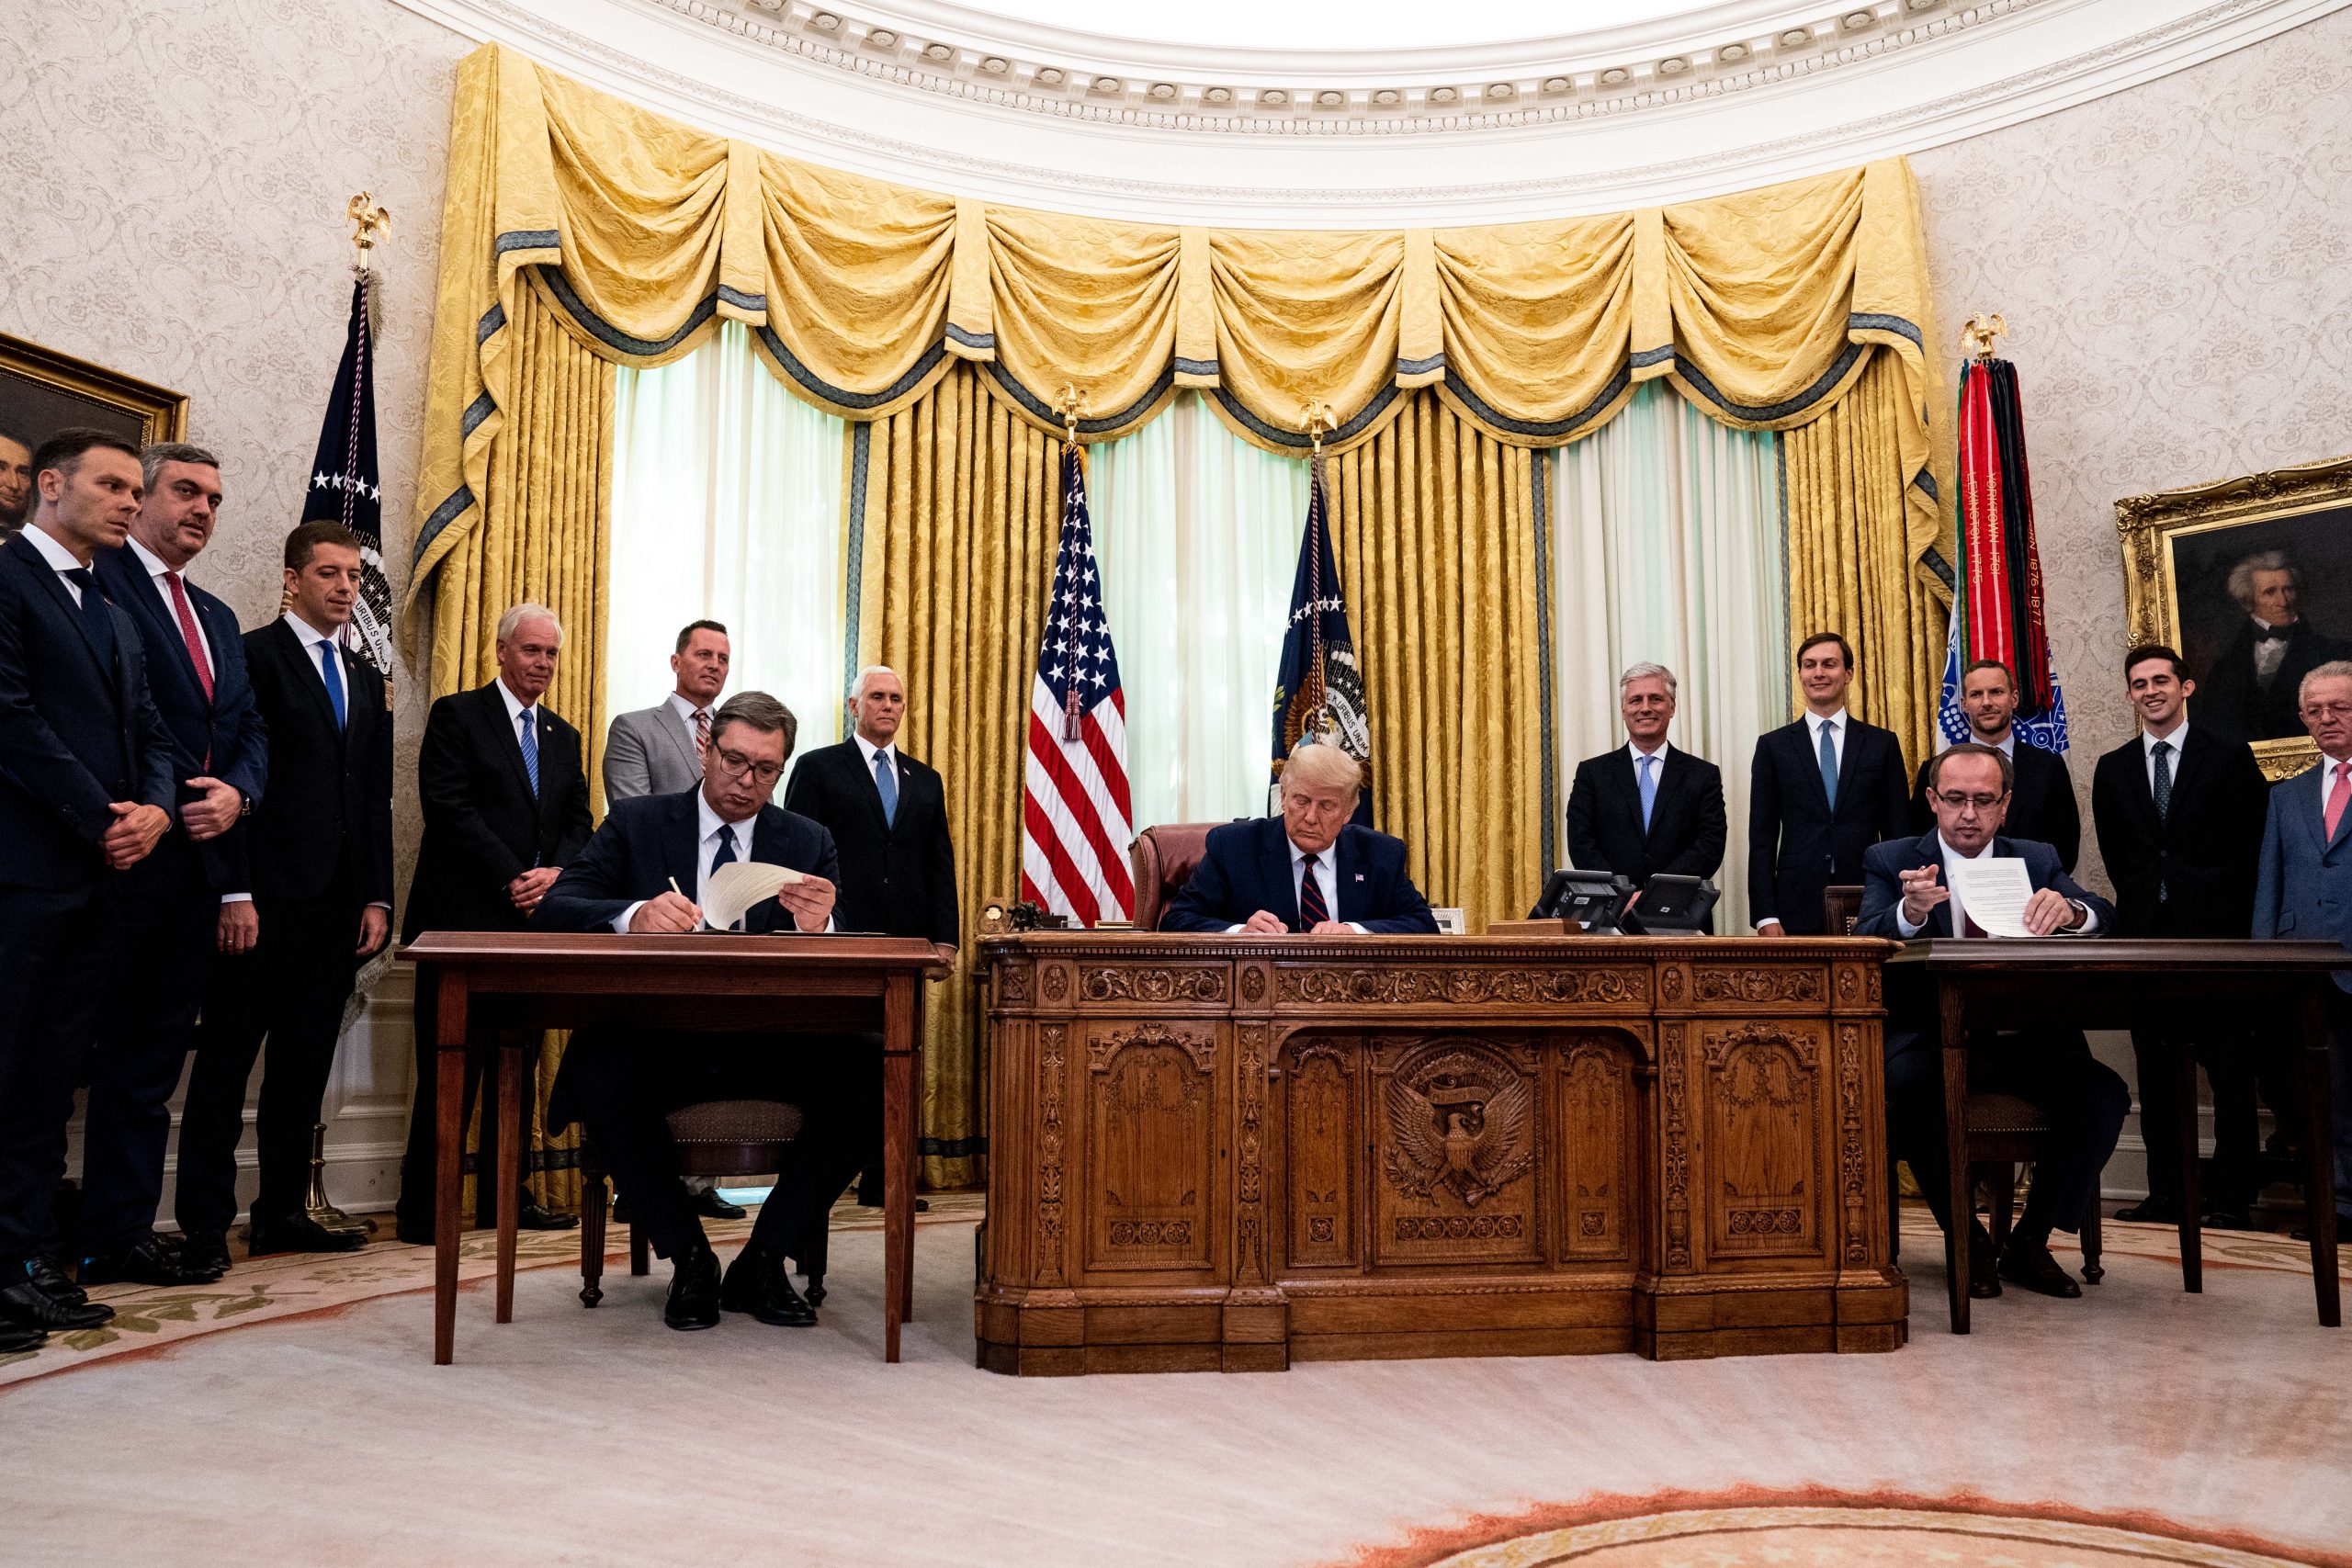 epa08646866 US President Donald J. Trump (C) participates in a signing ceremony and trilateral meeting with the President of the Republic of Serbia, Aleksandar Vučić (L), and the Prime Minister of the Republic of Kosovo, Avdullah Hoti (R), at the White House, in Washington, DC, USA, on 04 September 2020.  EPA/ANNA MONEYMAKER / POOL